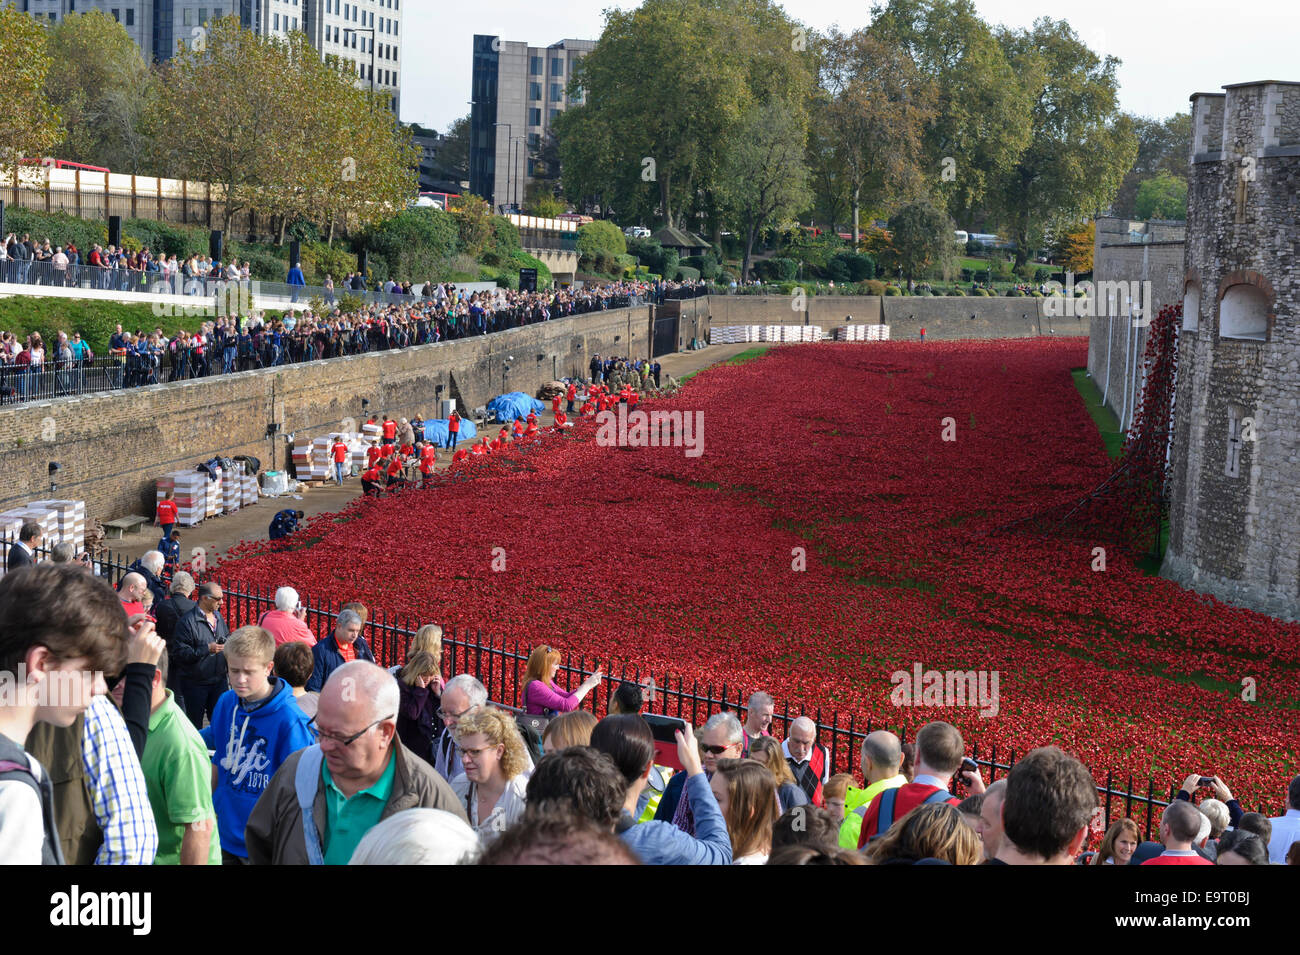 Visitors admiring the display of poppies outside the wall of Tower of London, England, United Kingdom. Stock Photo